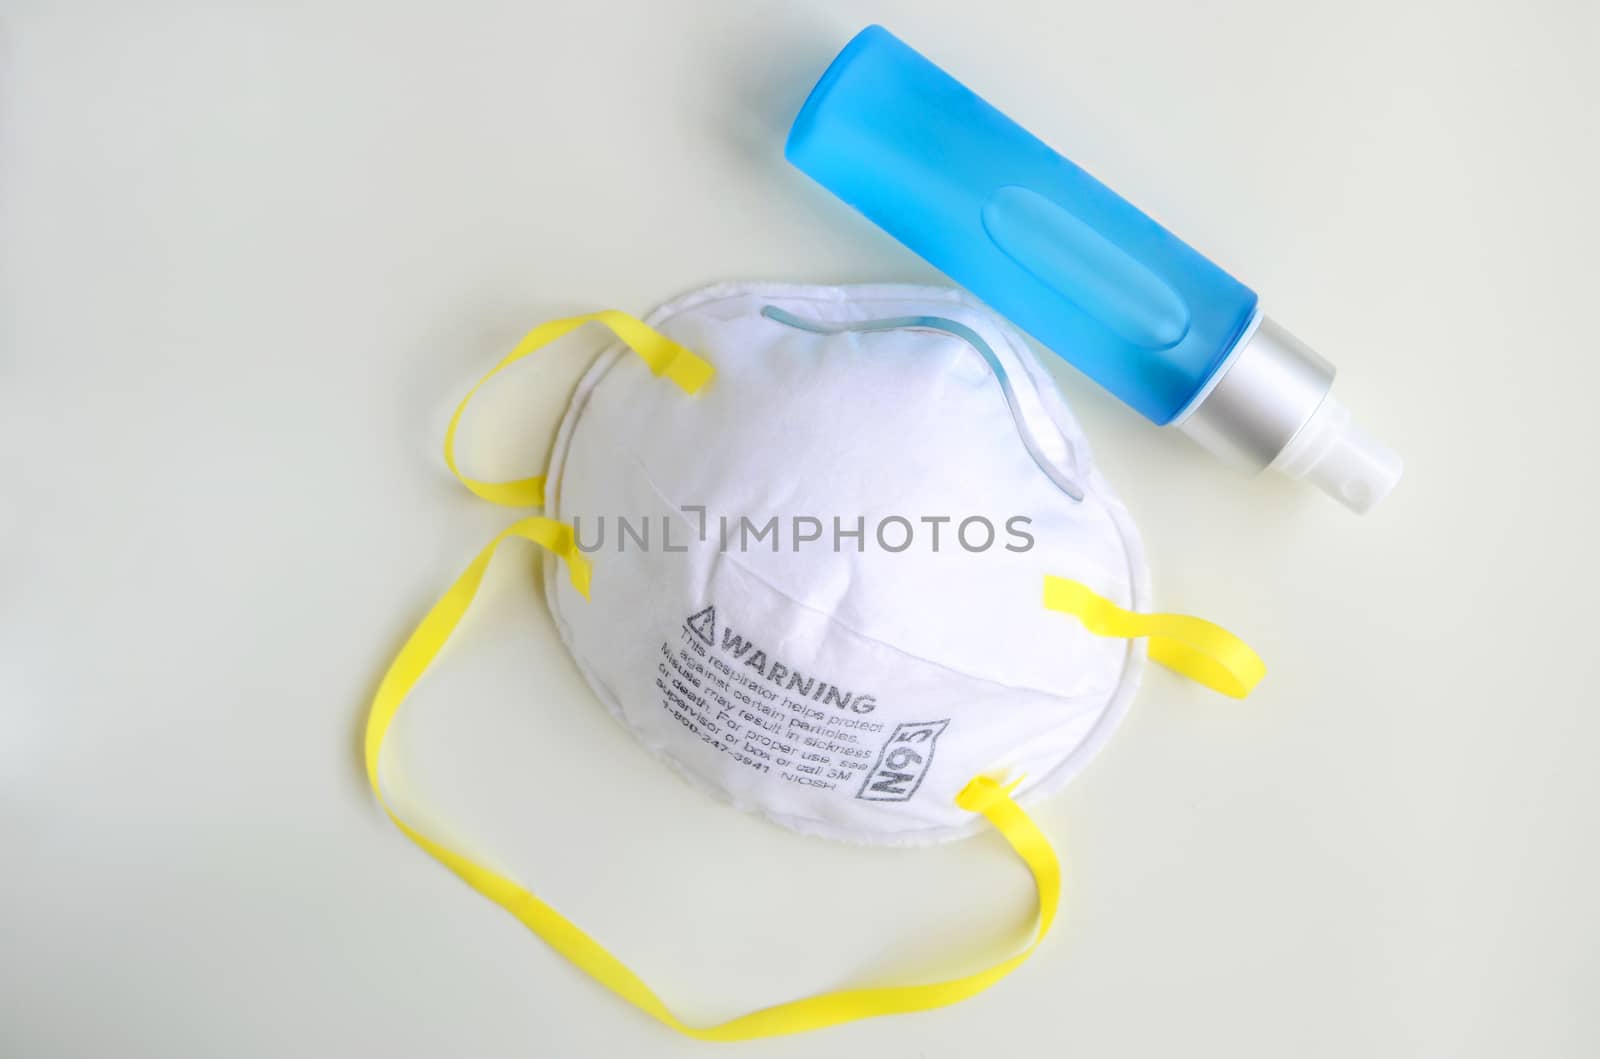 N95 respirator  with alcohol sanitizer gel on grey background for covid-19 Coronavirus prevention concept.